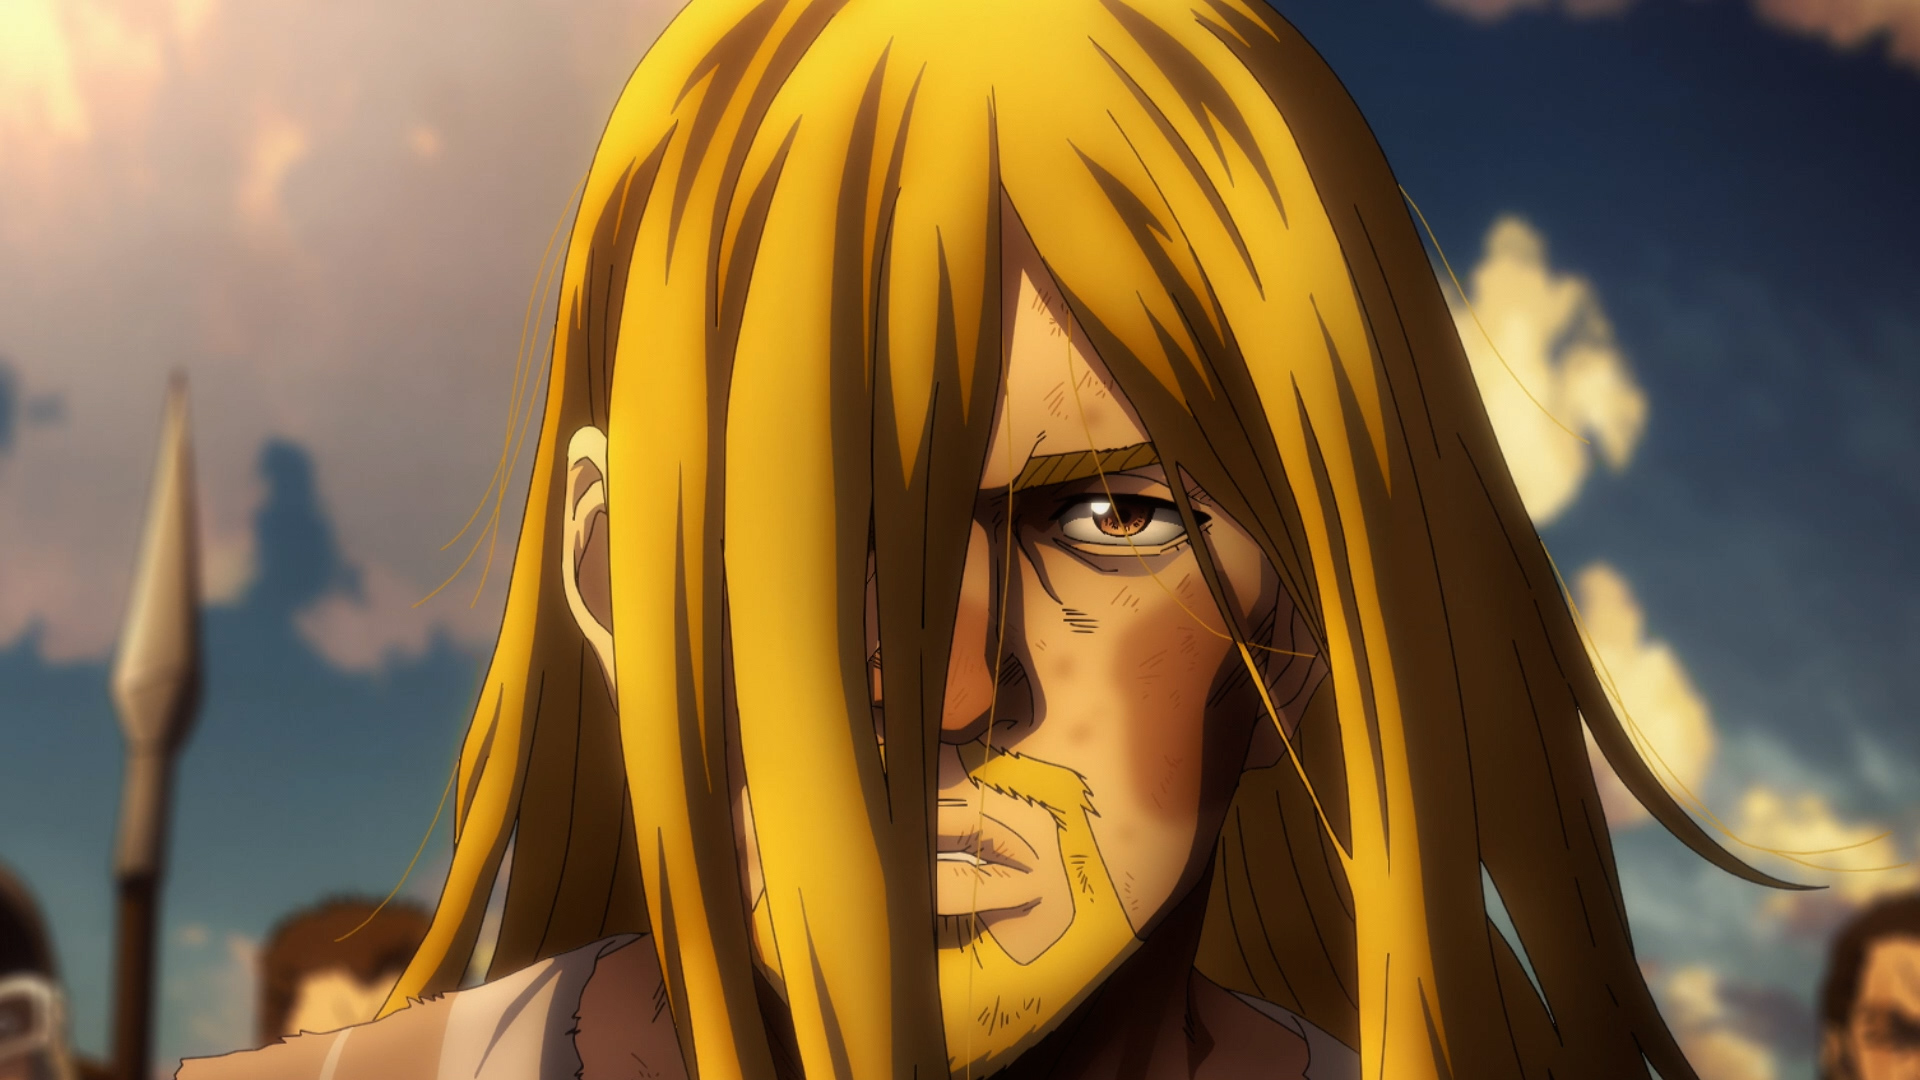 Vinland Saga Season 2 Gets New Trailers, Reveals Theme Songs for Second  Cour - Anime Corner